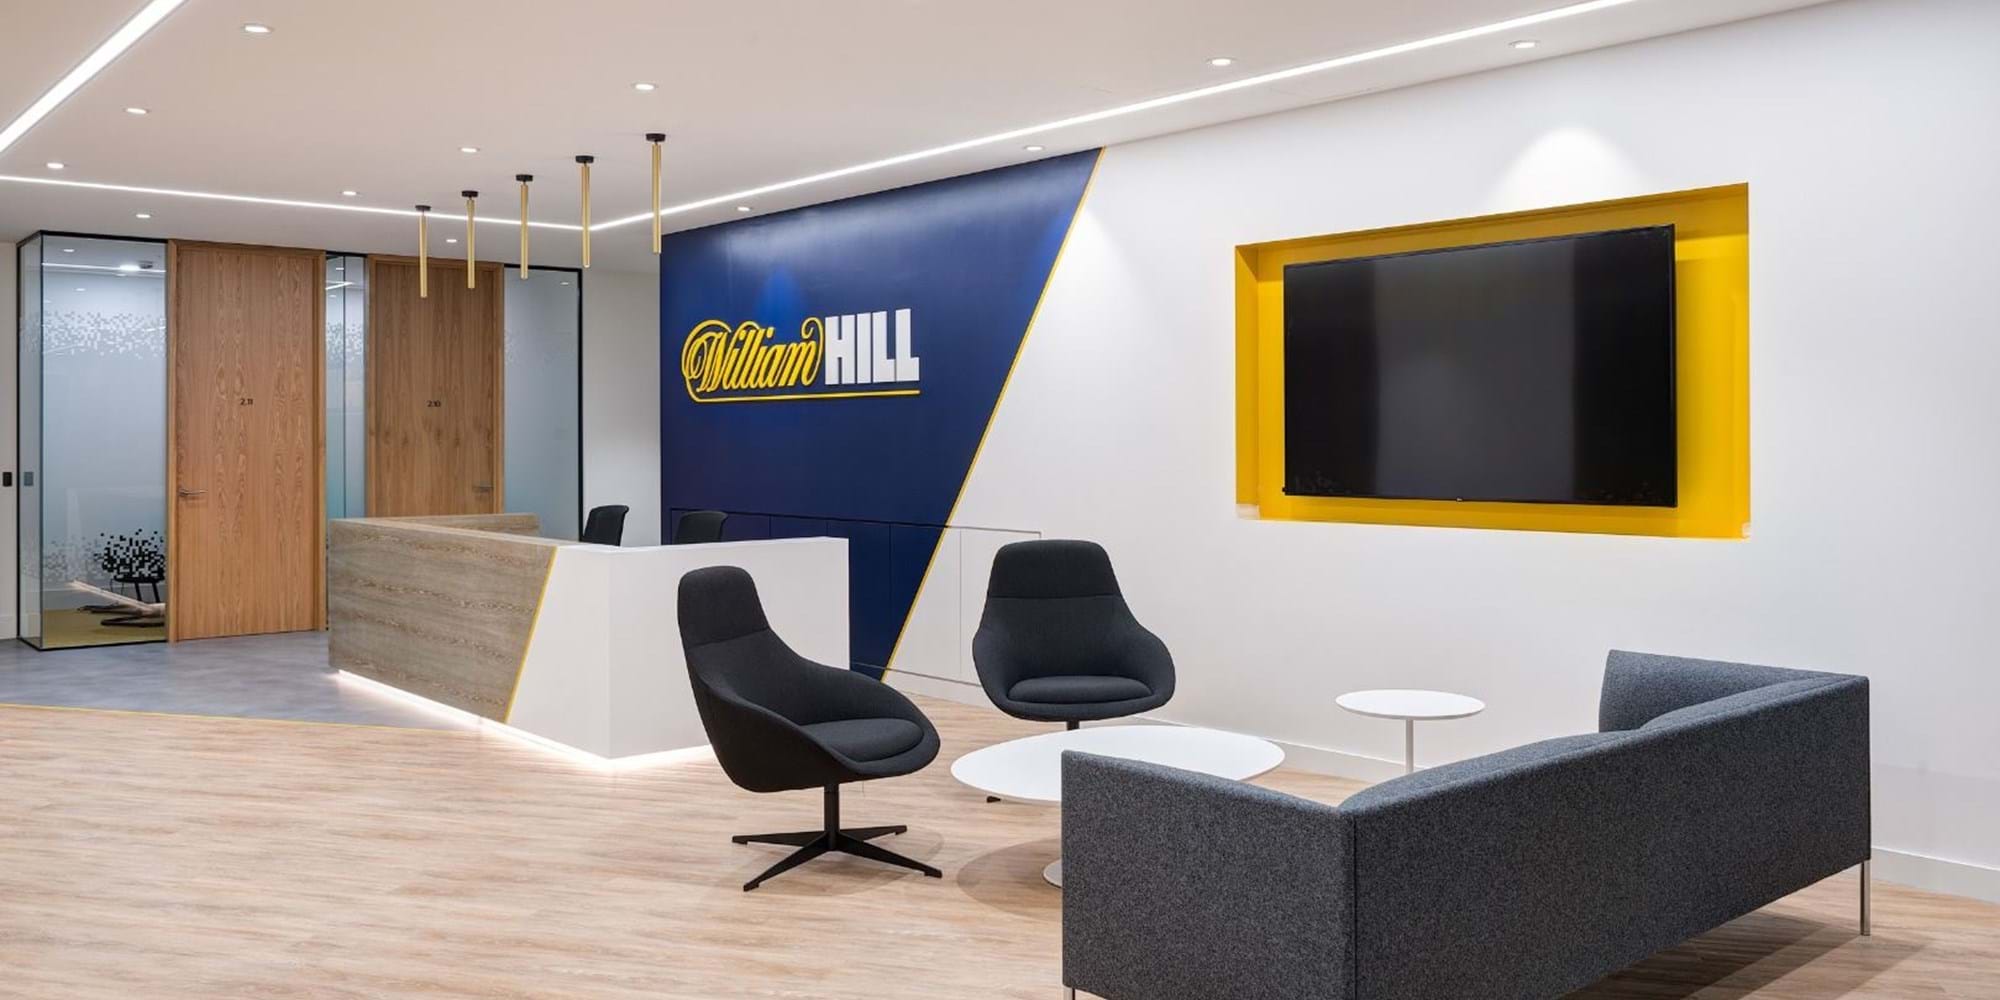 Modus Workspace office design, fit out and refurbishment - William Hill - William Hill 02 highres sRGB.jpg